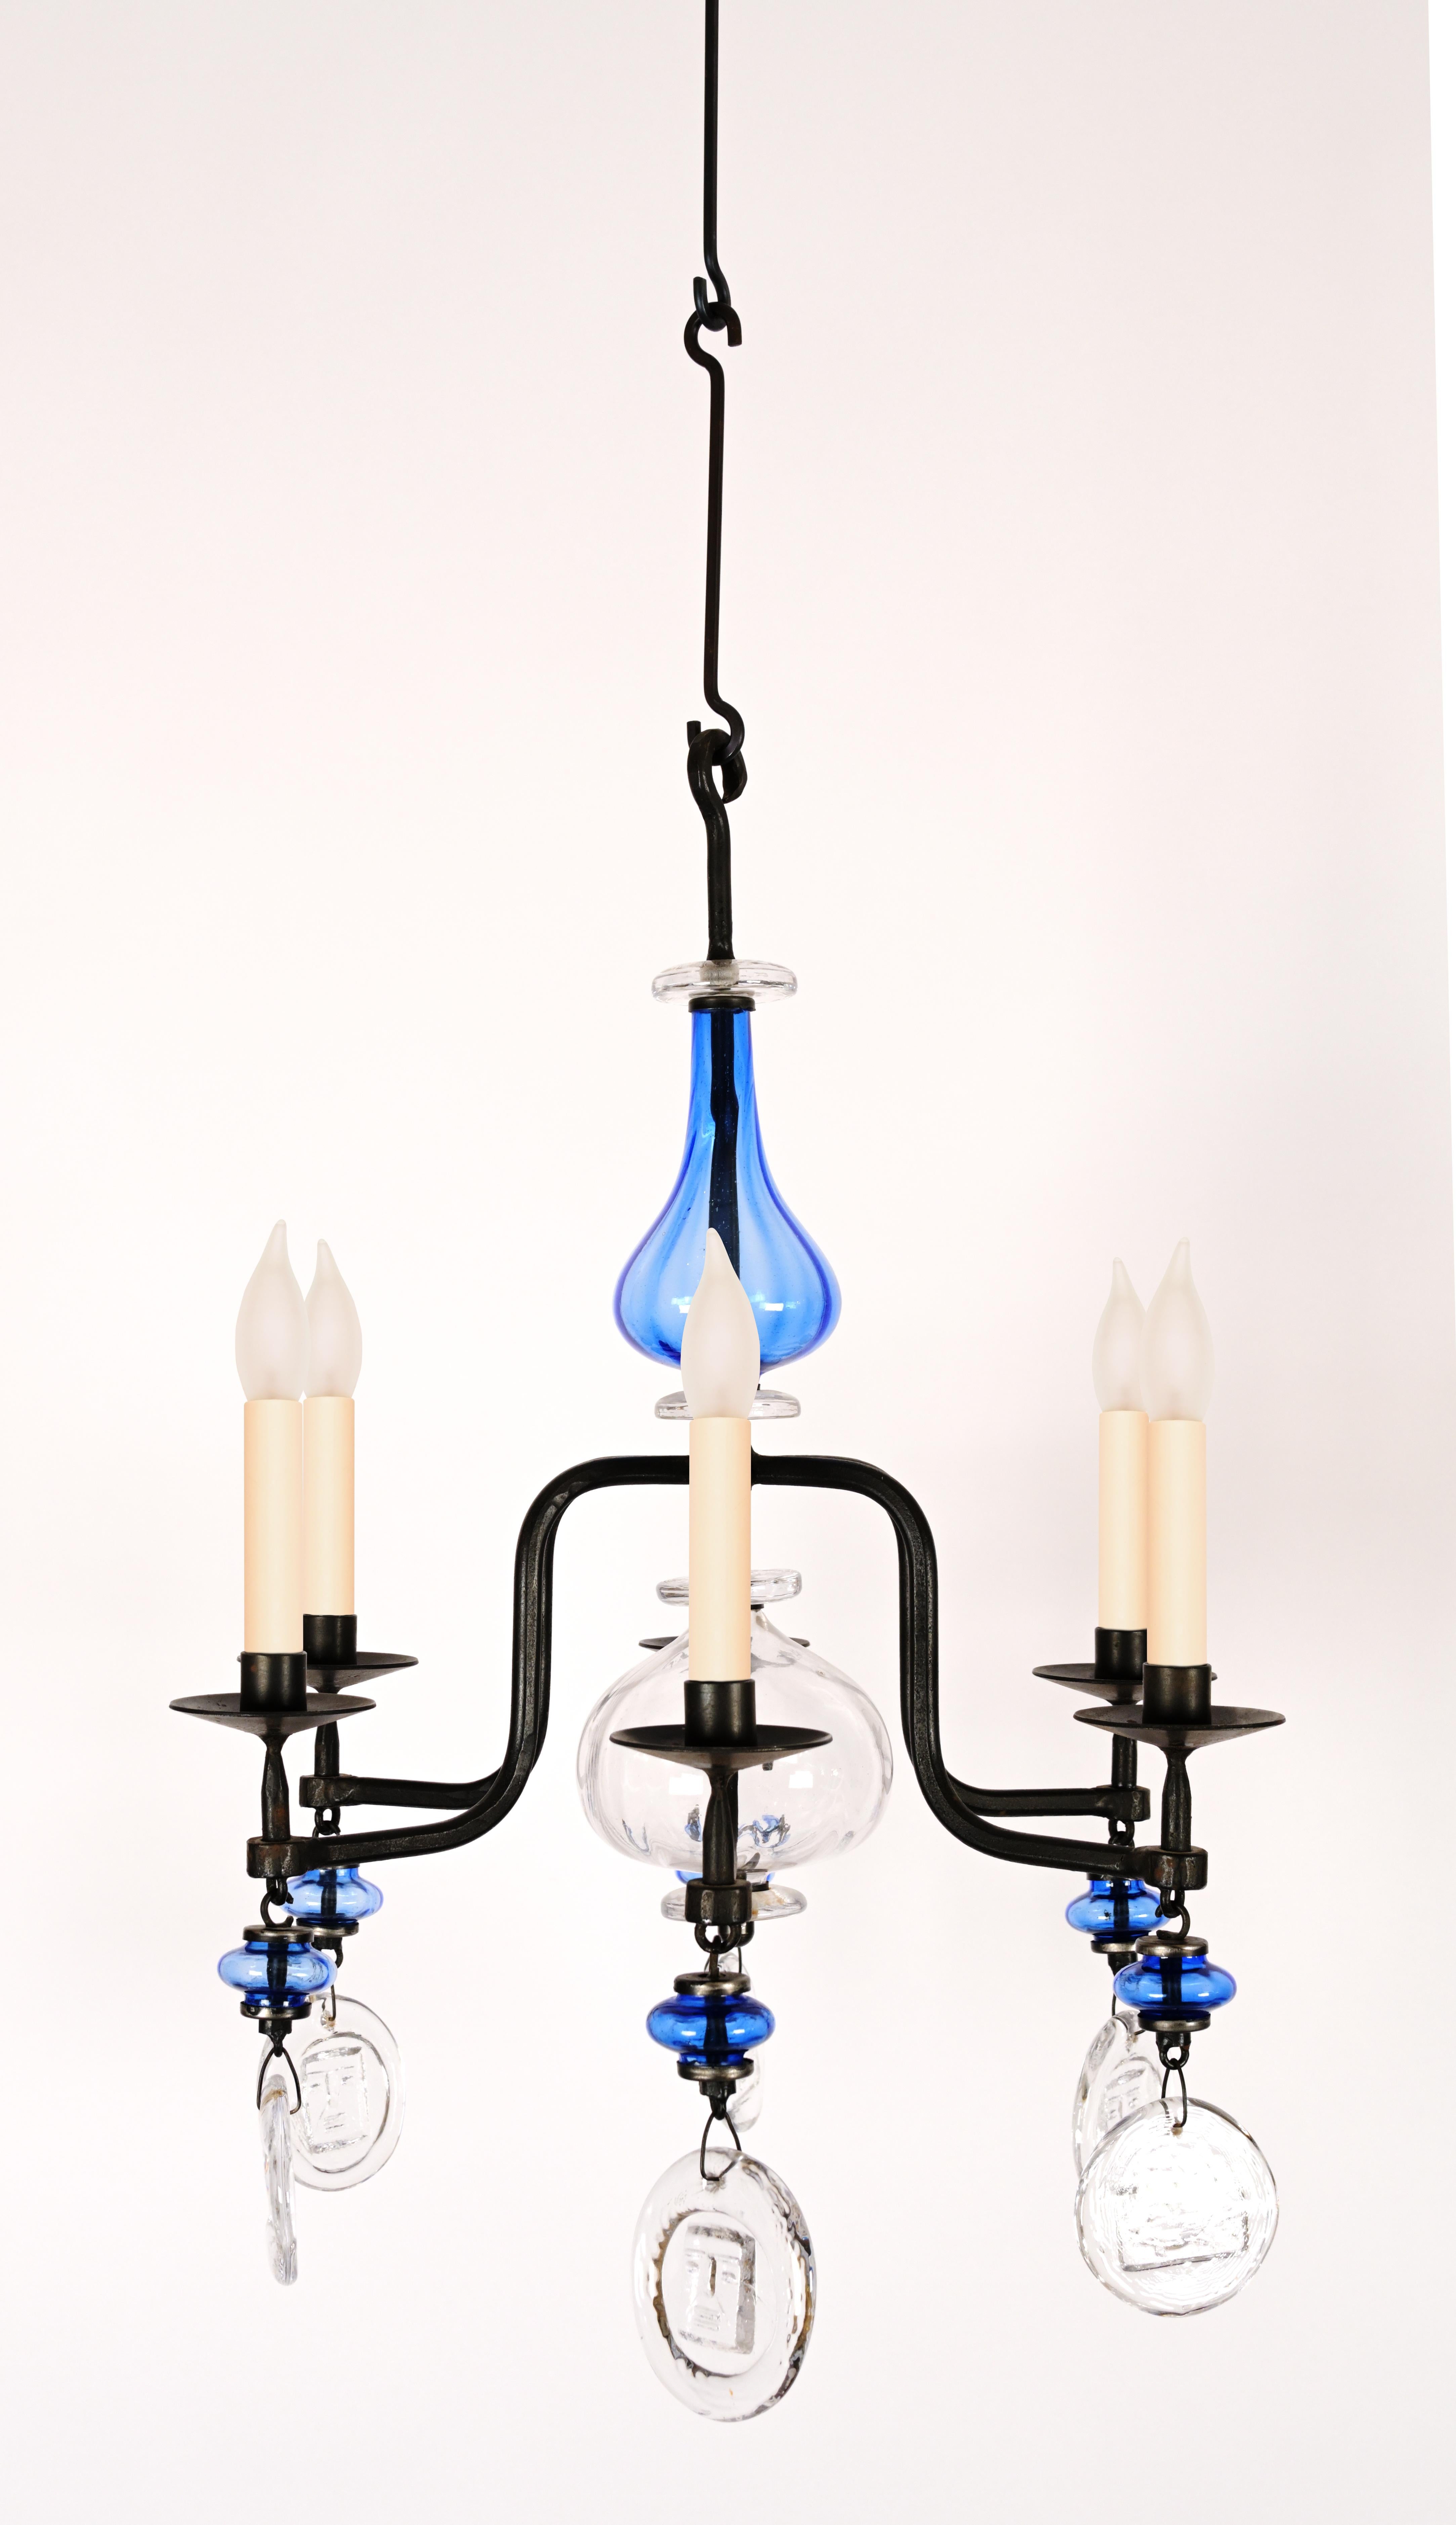 A glass and iron chandelier by Swedish Designer Erik Hoglund (1932-1998) having a bulbous blue blown glass center with 6 curved arms decorated with circular glass chips with imprints of playful faces and symbols. Includes standard wiring.